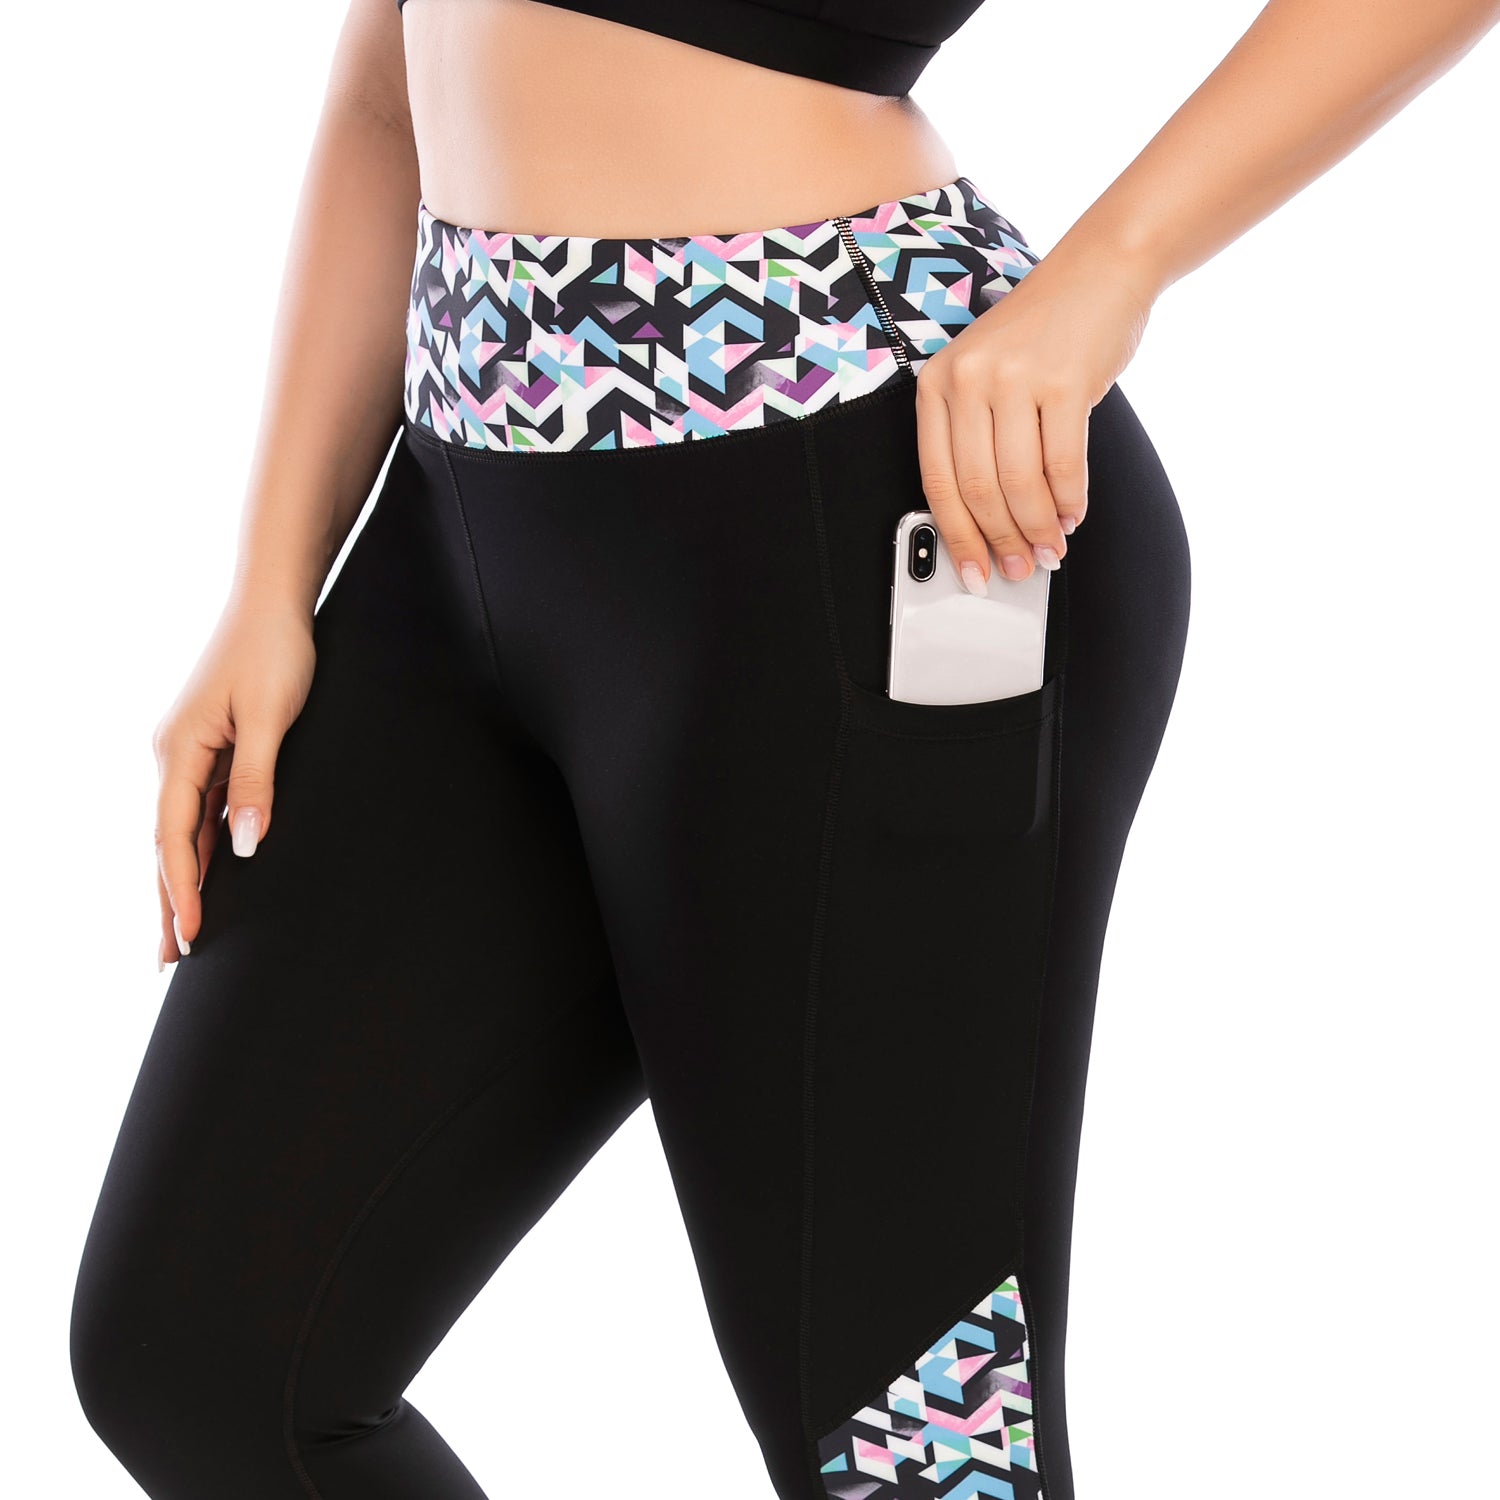 Plus Size Yoga Pants Workout Outfits Leggings with Pocket